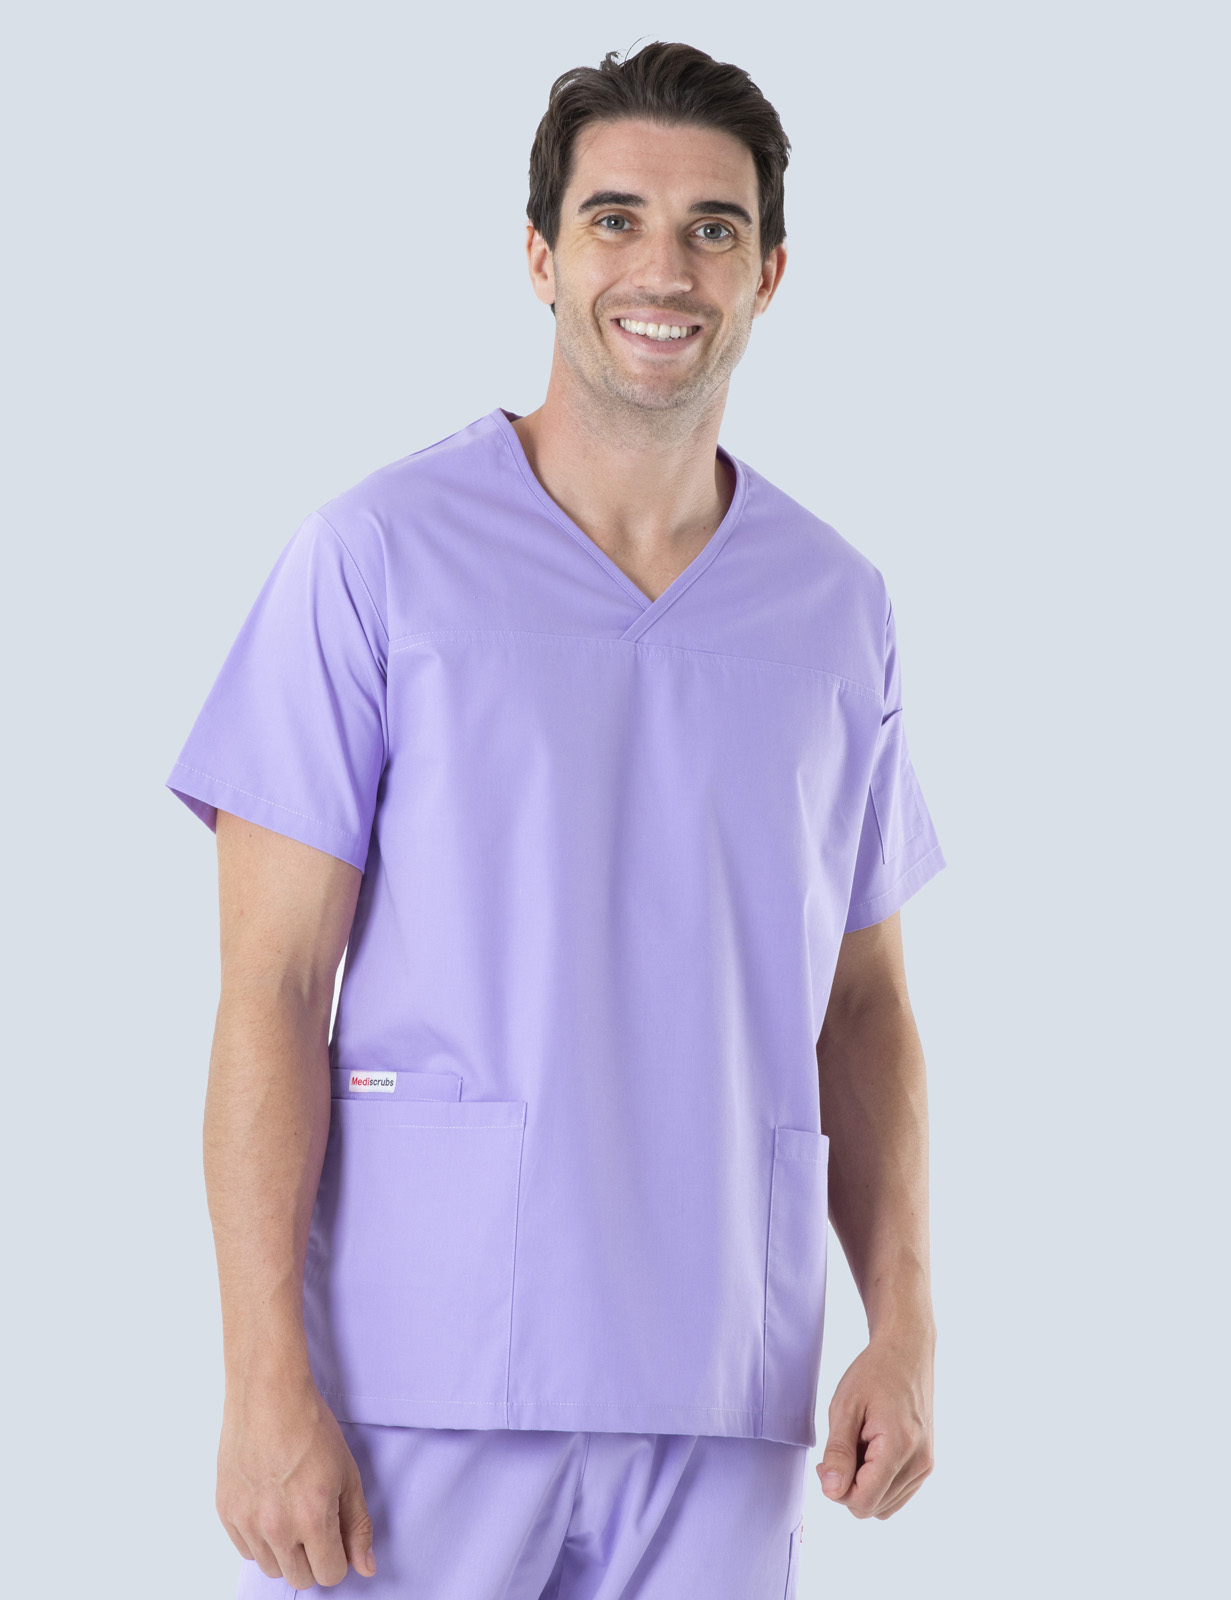 Men's Fit Solid Scrub Top - Lilac - 4X large